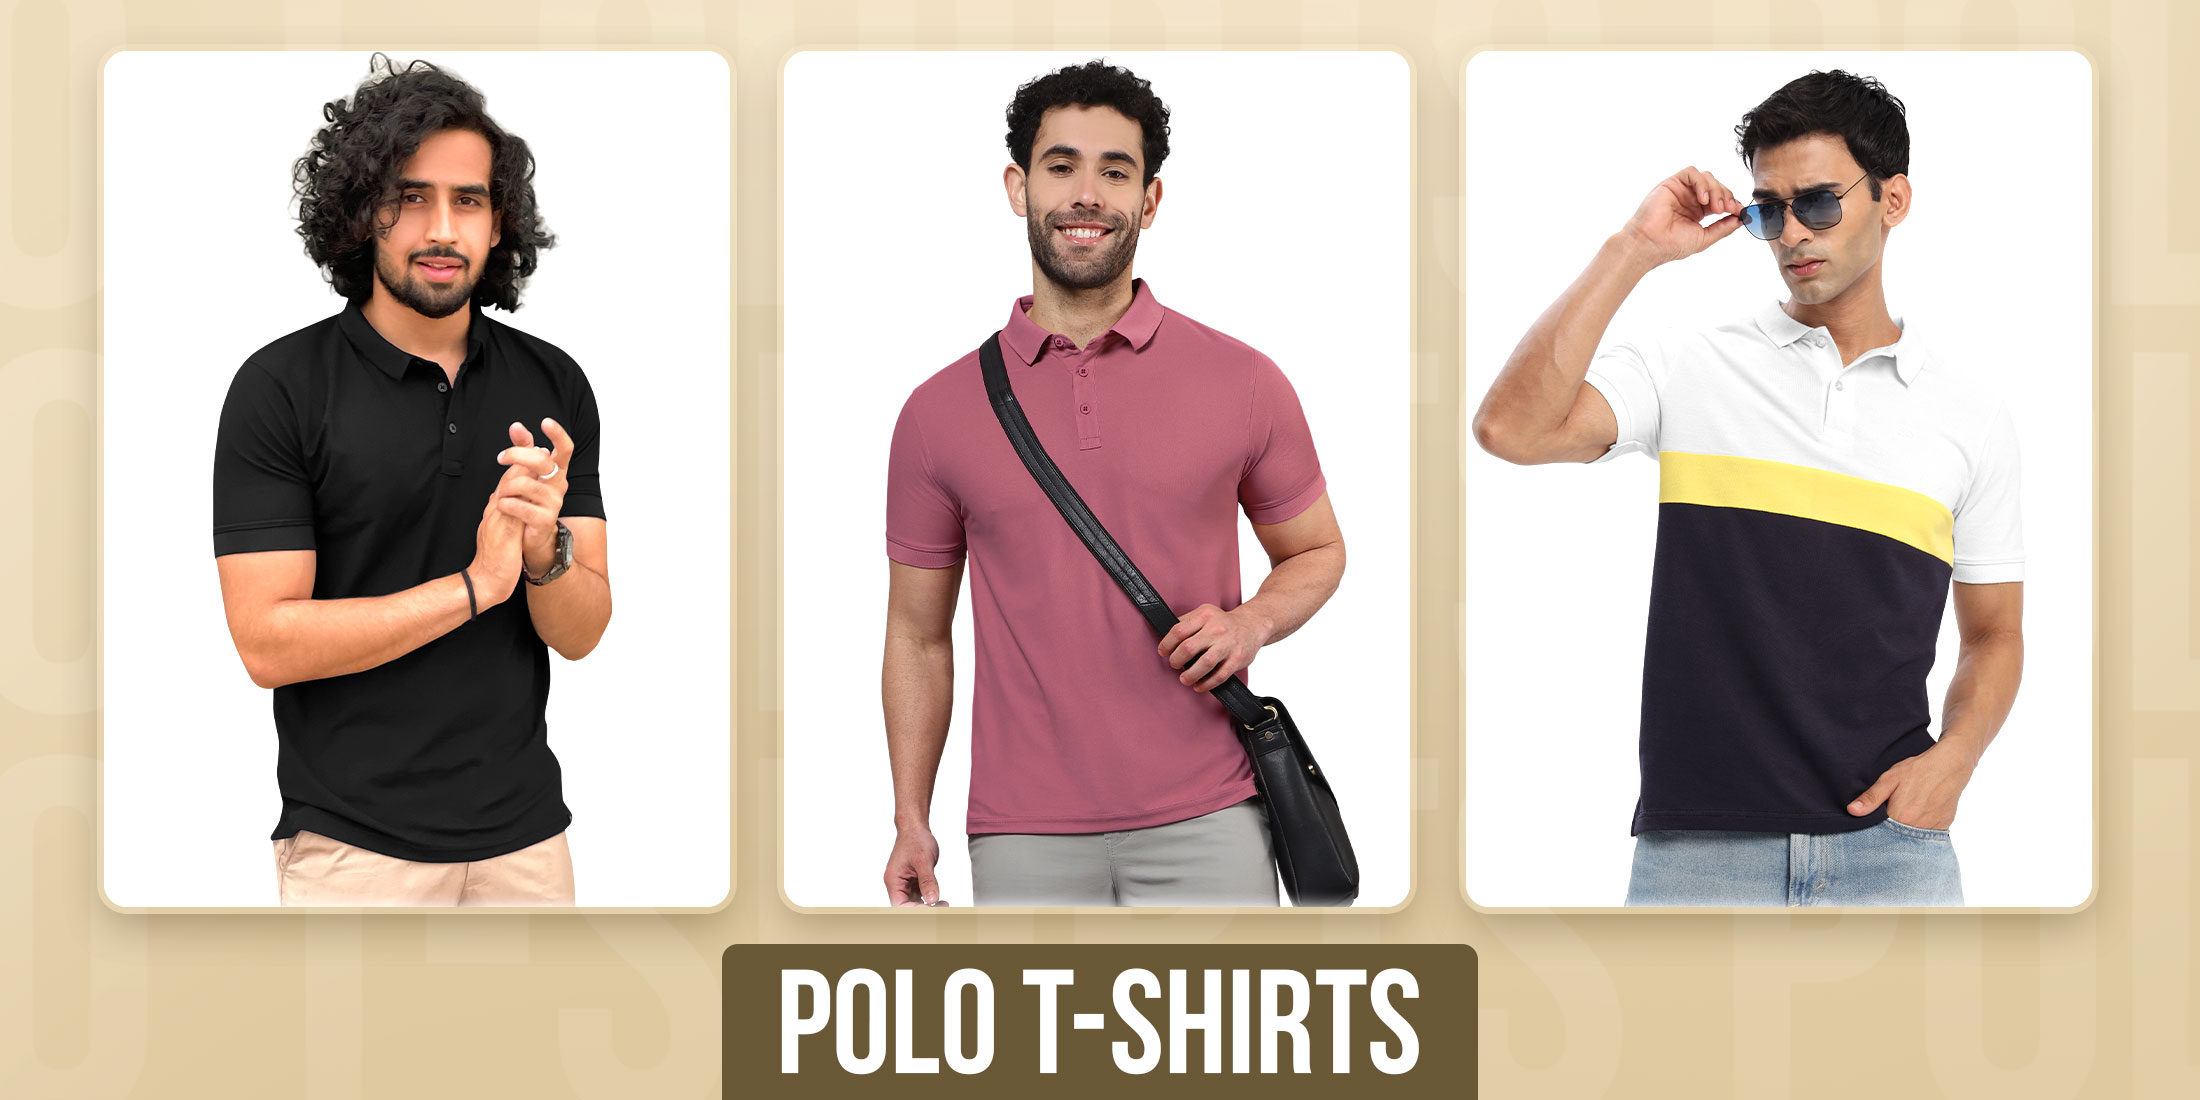 Polo Shirt Styles: 6 Versatile and Trendy Outfit Ideas for Men